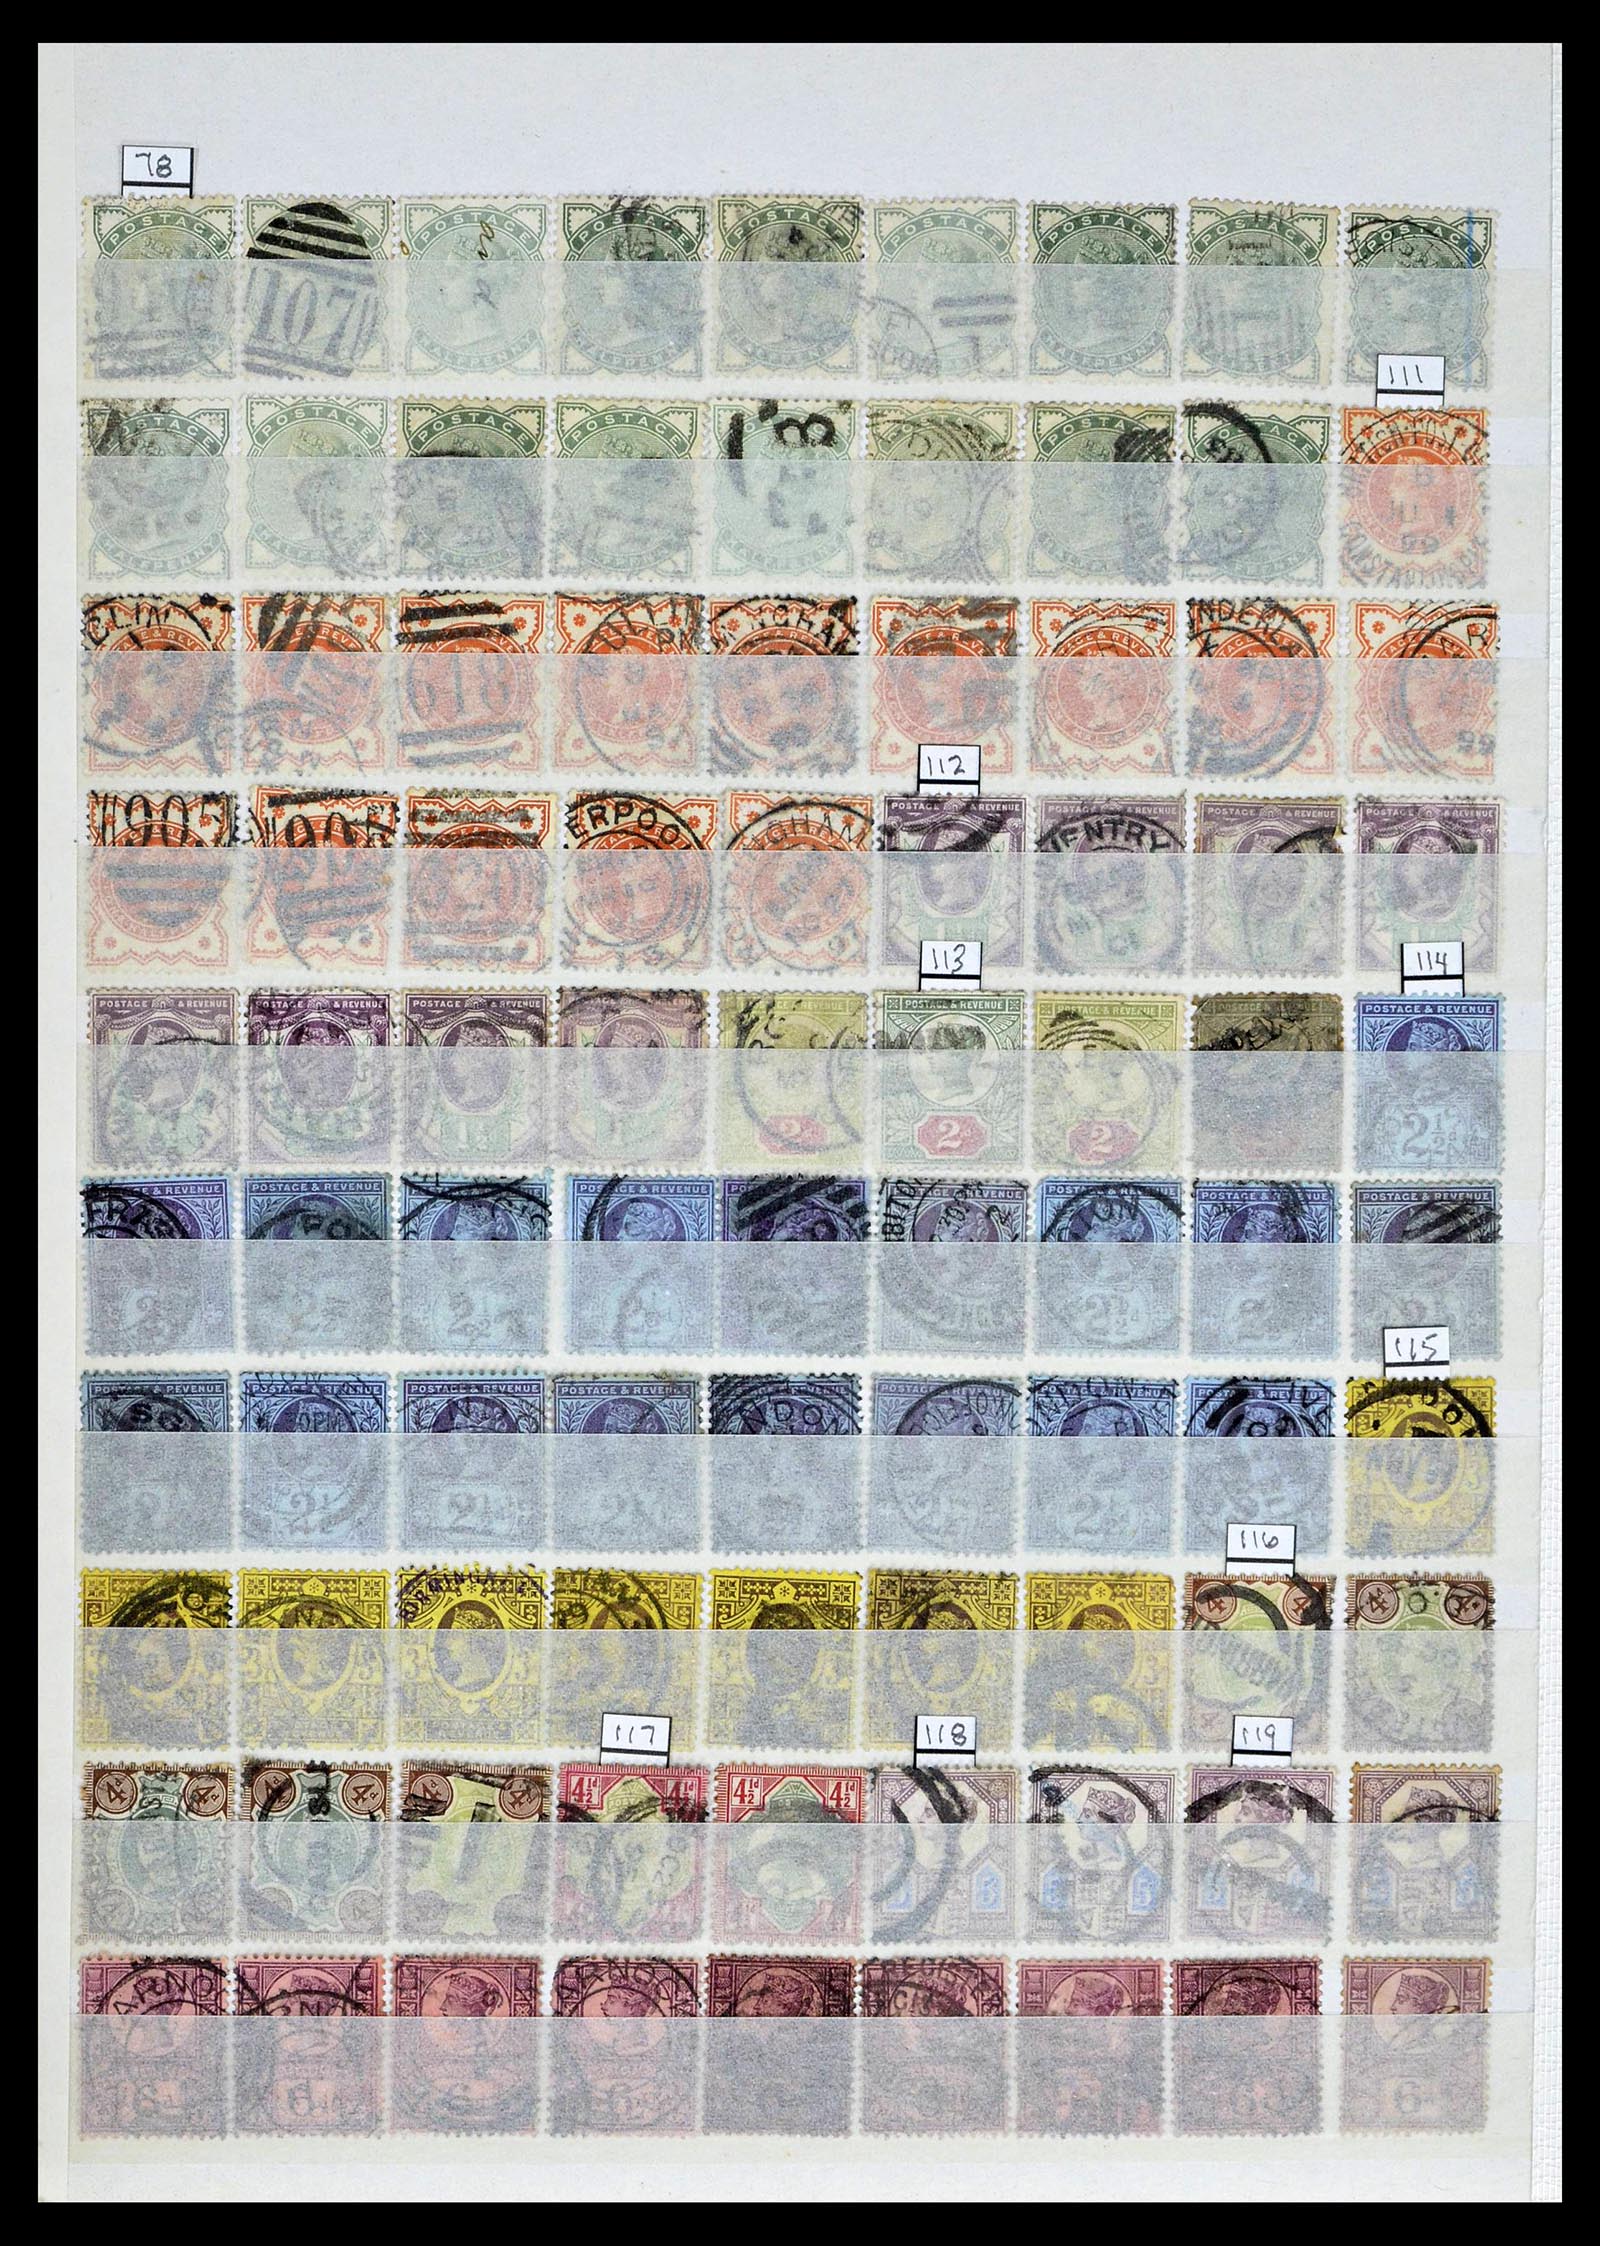 39196 0016 - Stamp collection 39196 Great Britain 1844-1955.